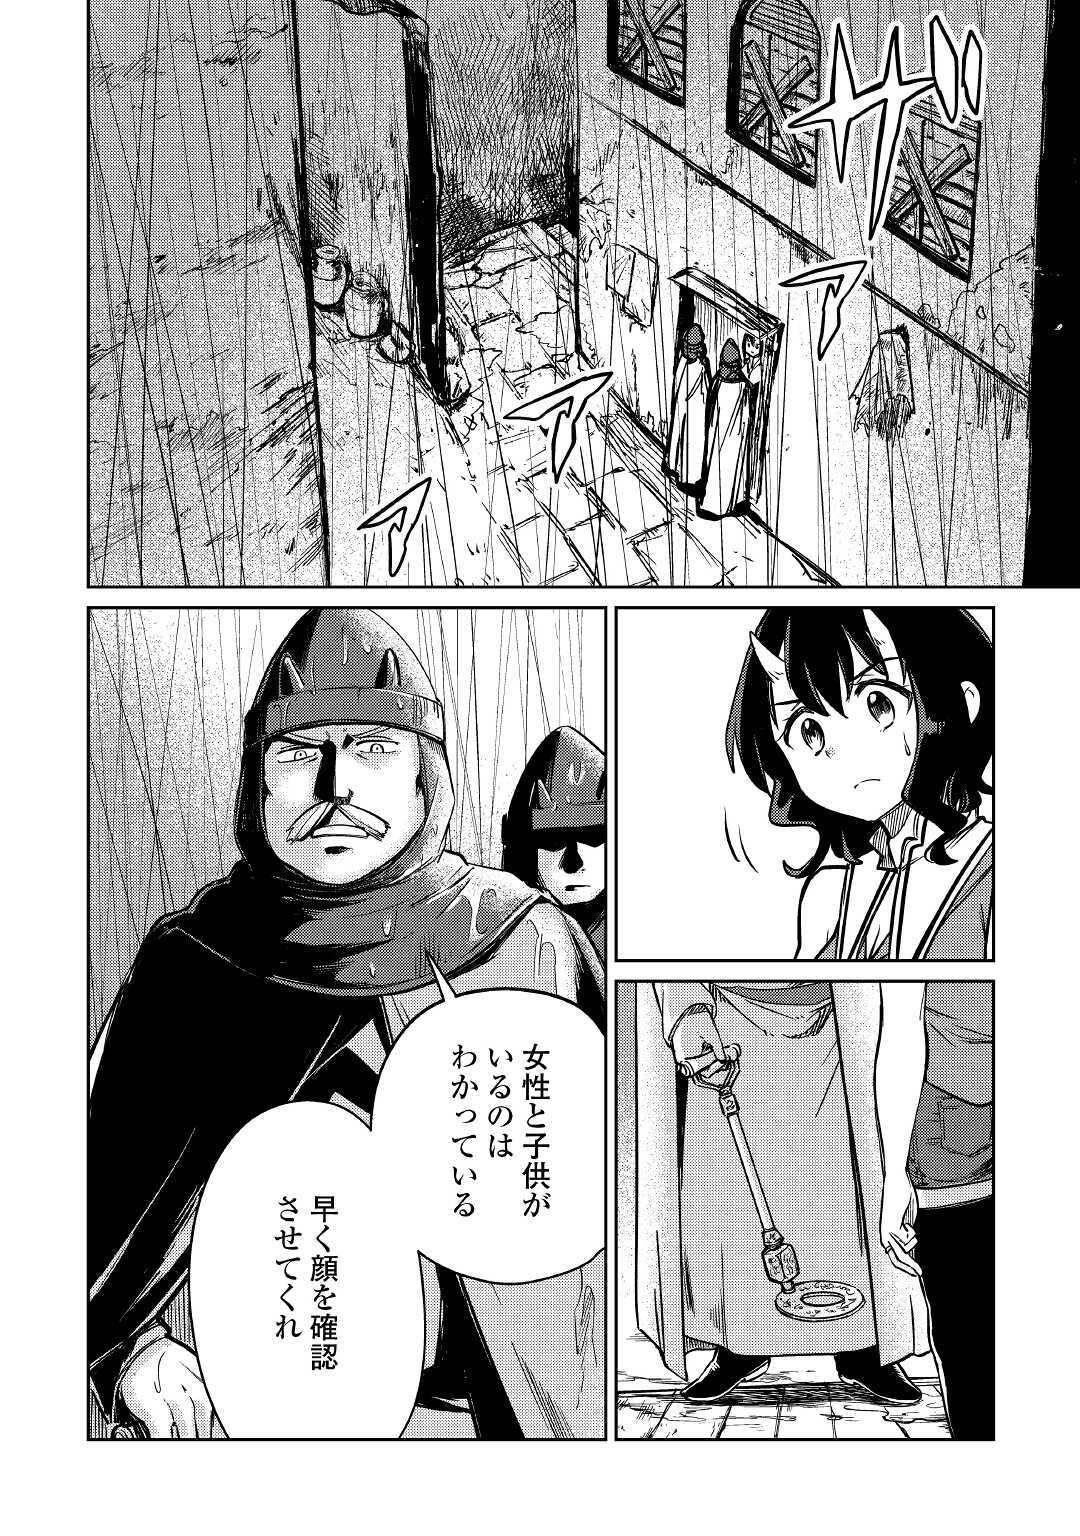 The Former Structural Researcher’s Story of Otherworldly Adventure 第27話 - Page 2